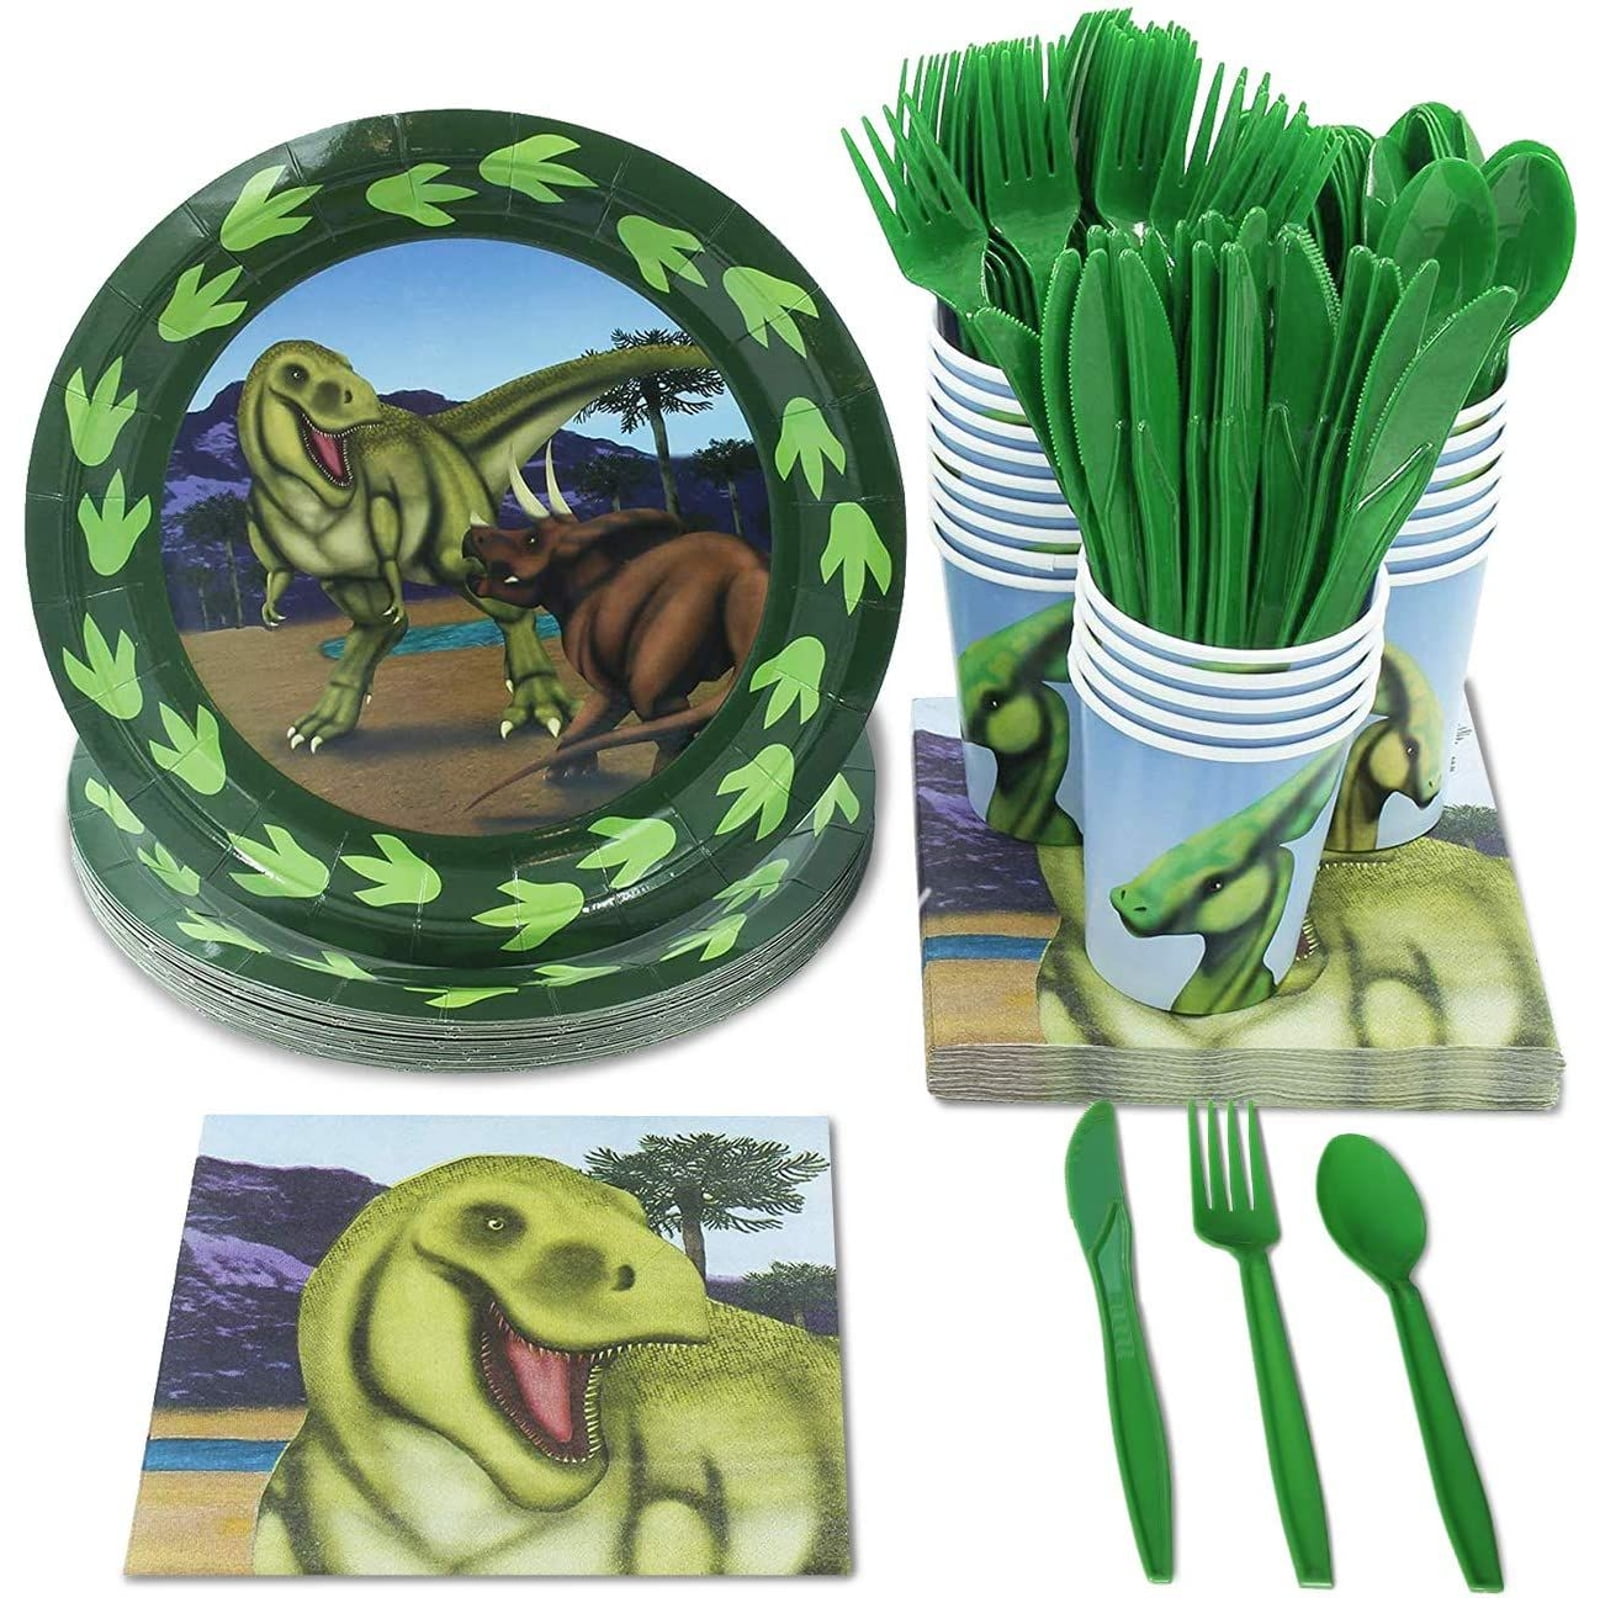 DreamJing 94 Pcs Dinosaur Party Tableware Set Dinosaur Party Supplies Including Paper Cups Plates Unicorn Napkins Tablecloth Birthday Banner Dinosaur Plates Tableware Kit Serve 10 Guests